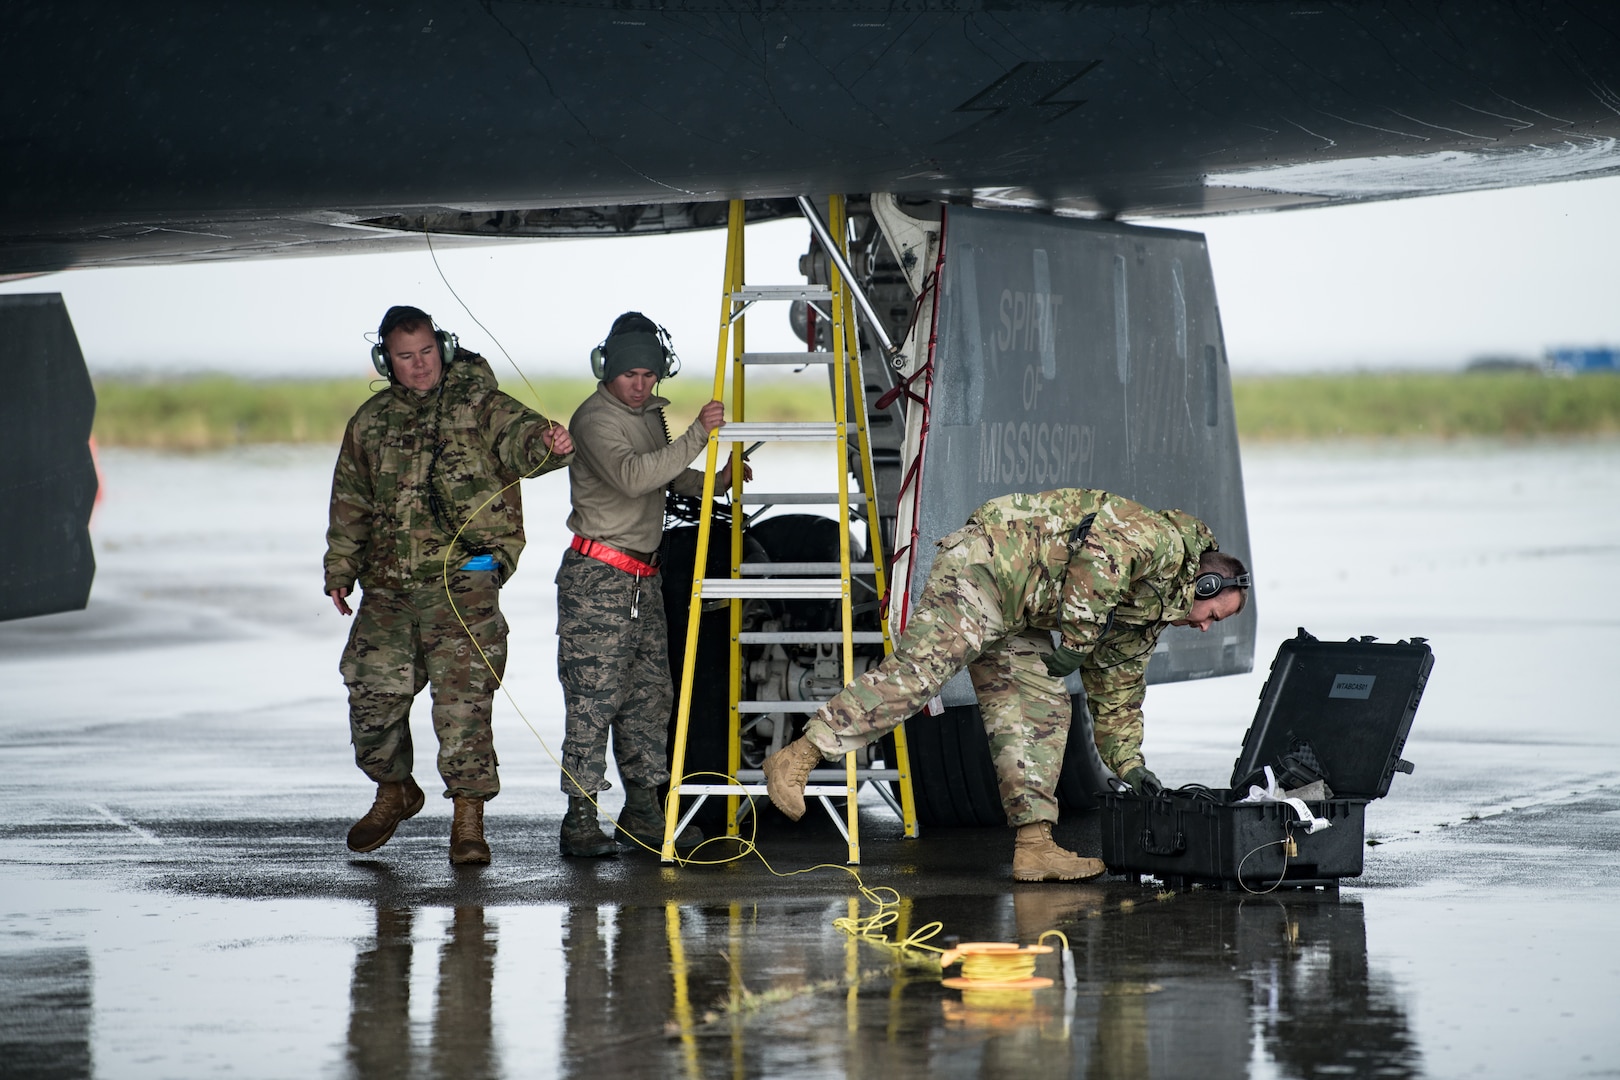 Airmen from the 509th Logistics Readiness Squadron fuel distribution operators from Whiteman Air Force Base, Missouri conduct a hot-pit refueling on a B-2 Spirit Bomber at Naval Air Station Keflavik, Iceland, August 28, 2019. Hot-pit refueling is a method of refueling an aircraft without shutting down the engines. This is the B-2s first time landing in Iceland. Forward locations like Iceland enhance the collective defense capabilities of both the U.S. and NATO allies.